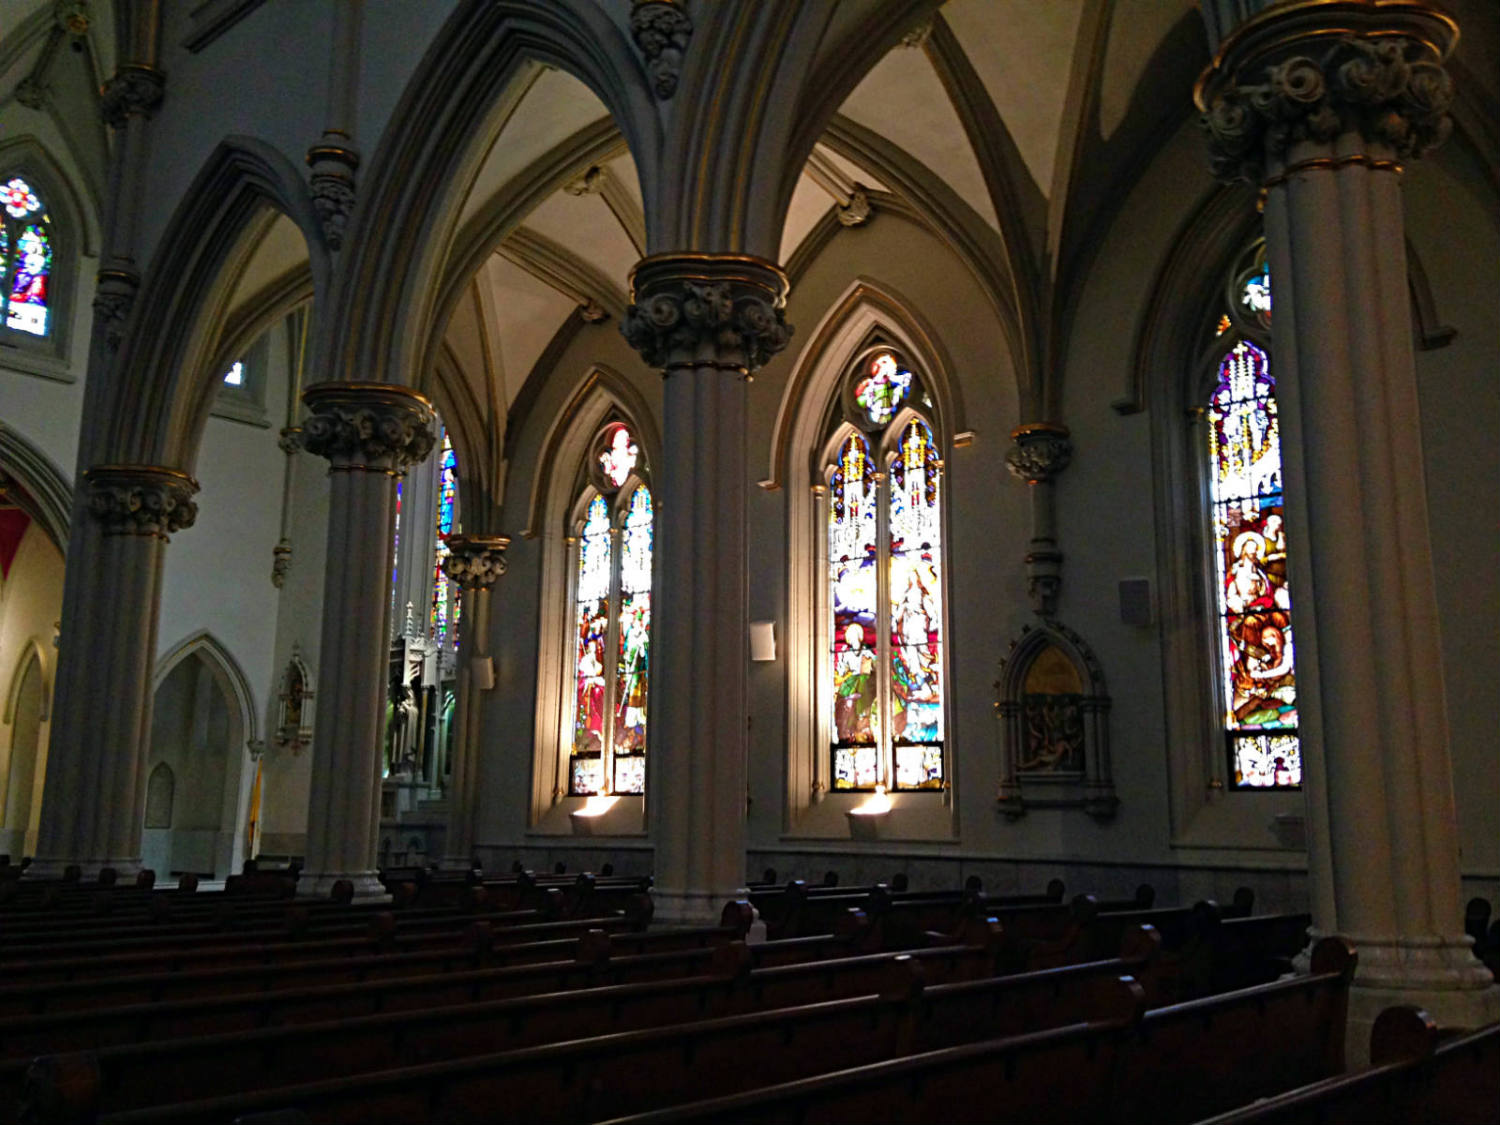 Stained Glass and Nave in Buffalo's St. Joseph Cathedral